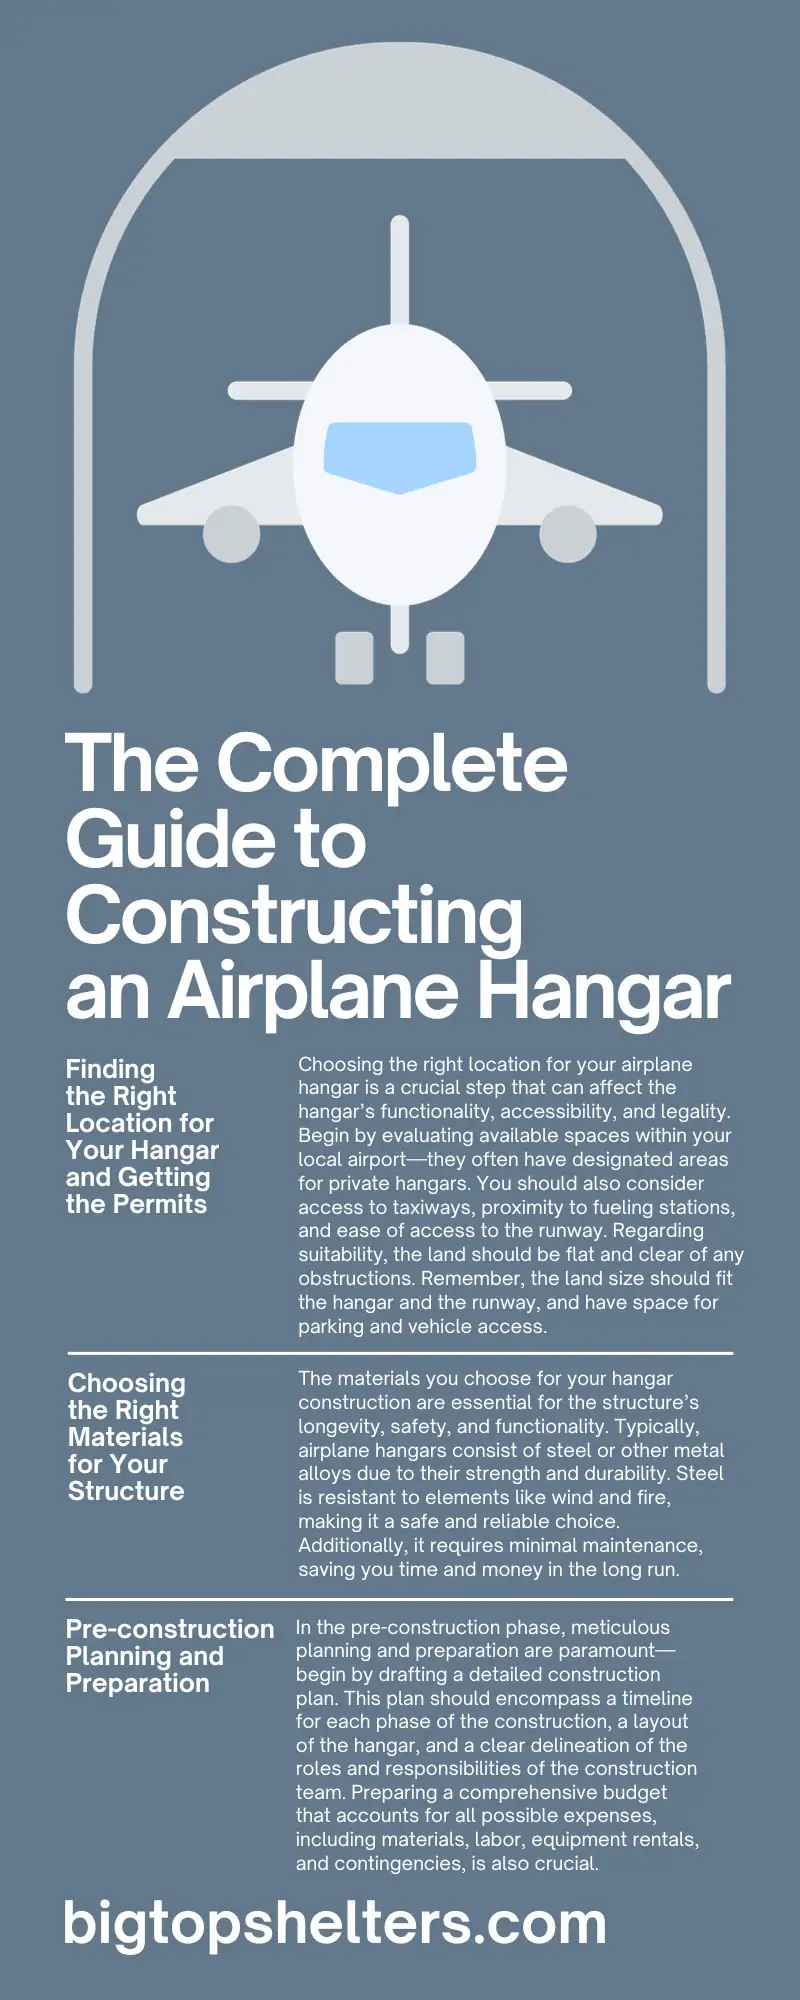 The Complete Guide to Constructing an Airplane Hangar